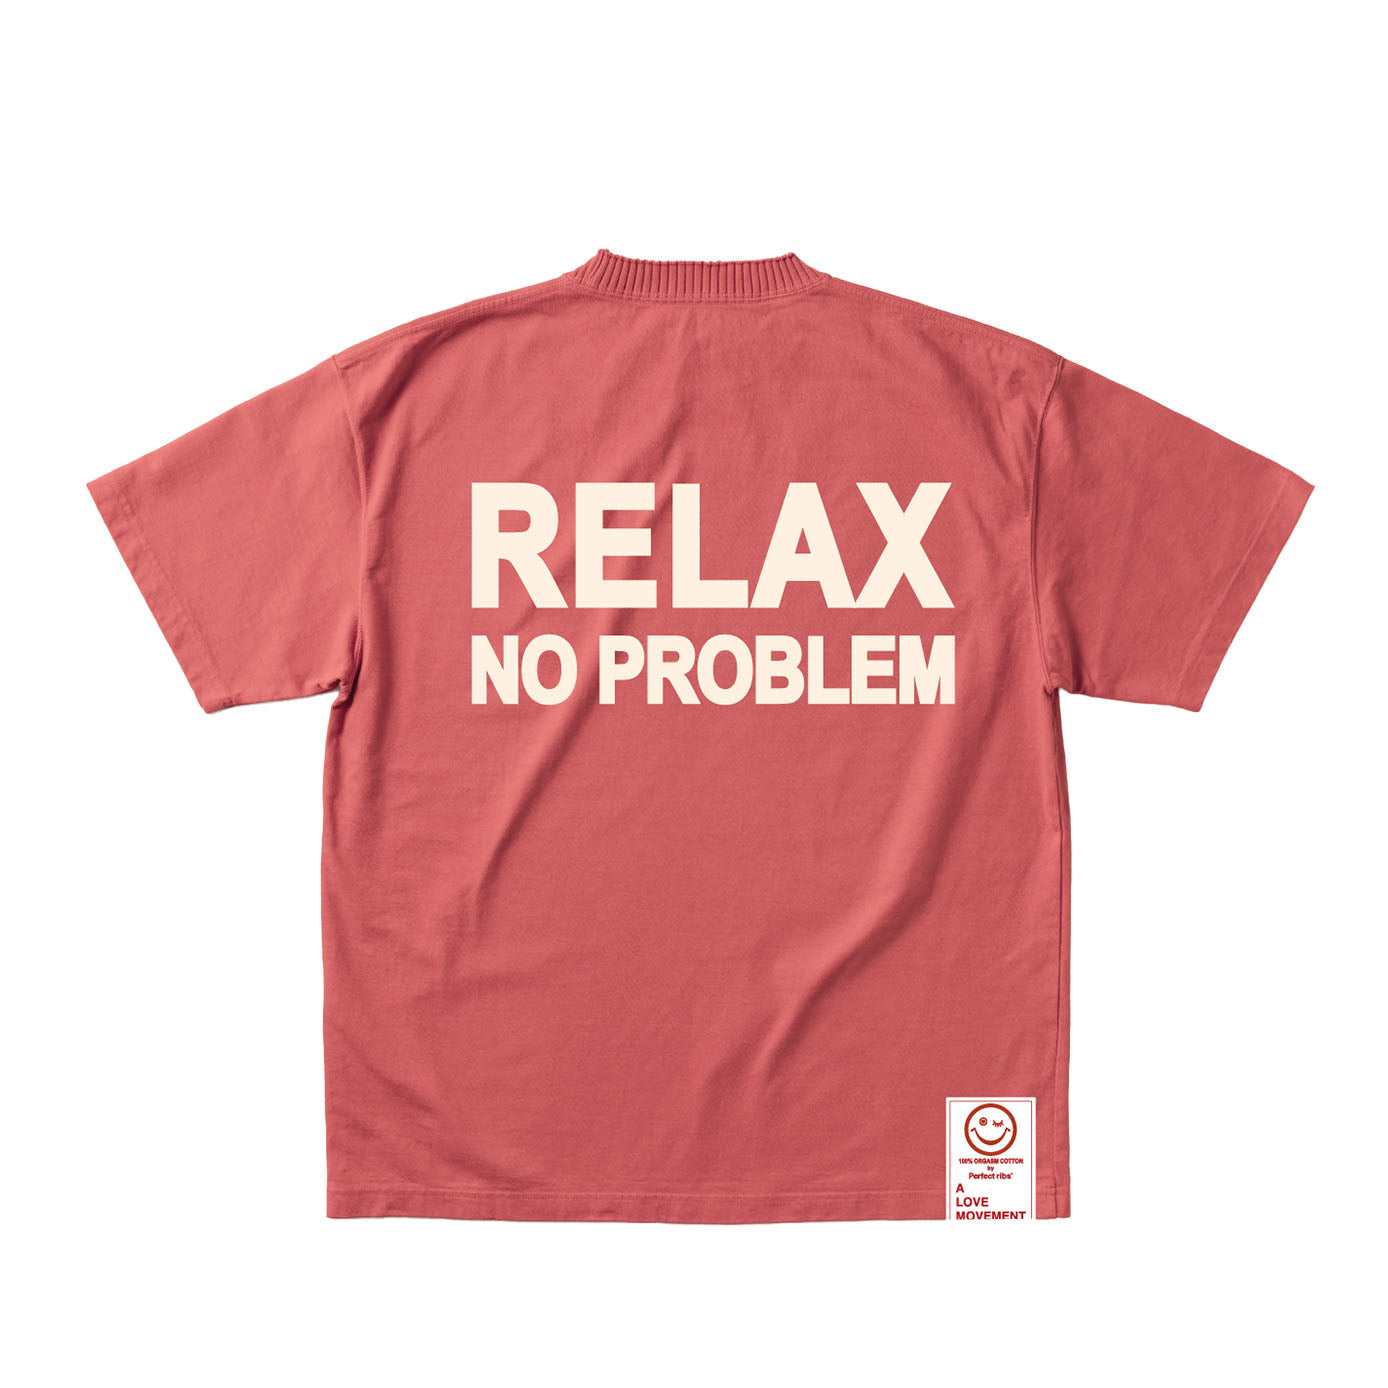 【Perfect ribs®︎×A LOVE MOVEMENT】"RELAX NO PROBLEM"Basic Short Sleeve T Shirts /Vintage Red (ベーシック ショートスリーブ ティーシャツ/ヴィンテージ レッド)